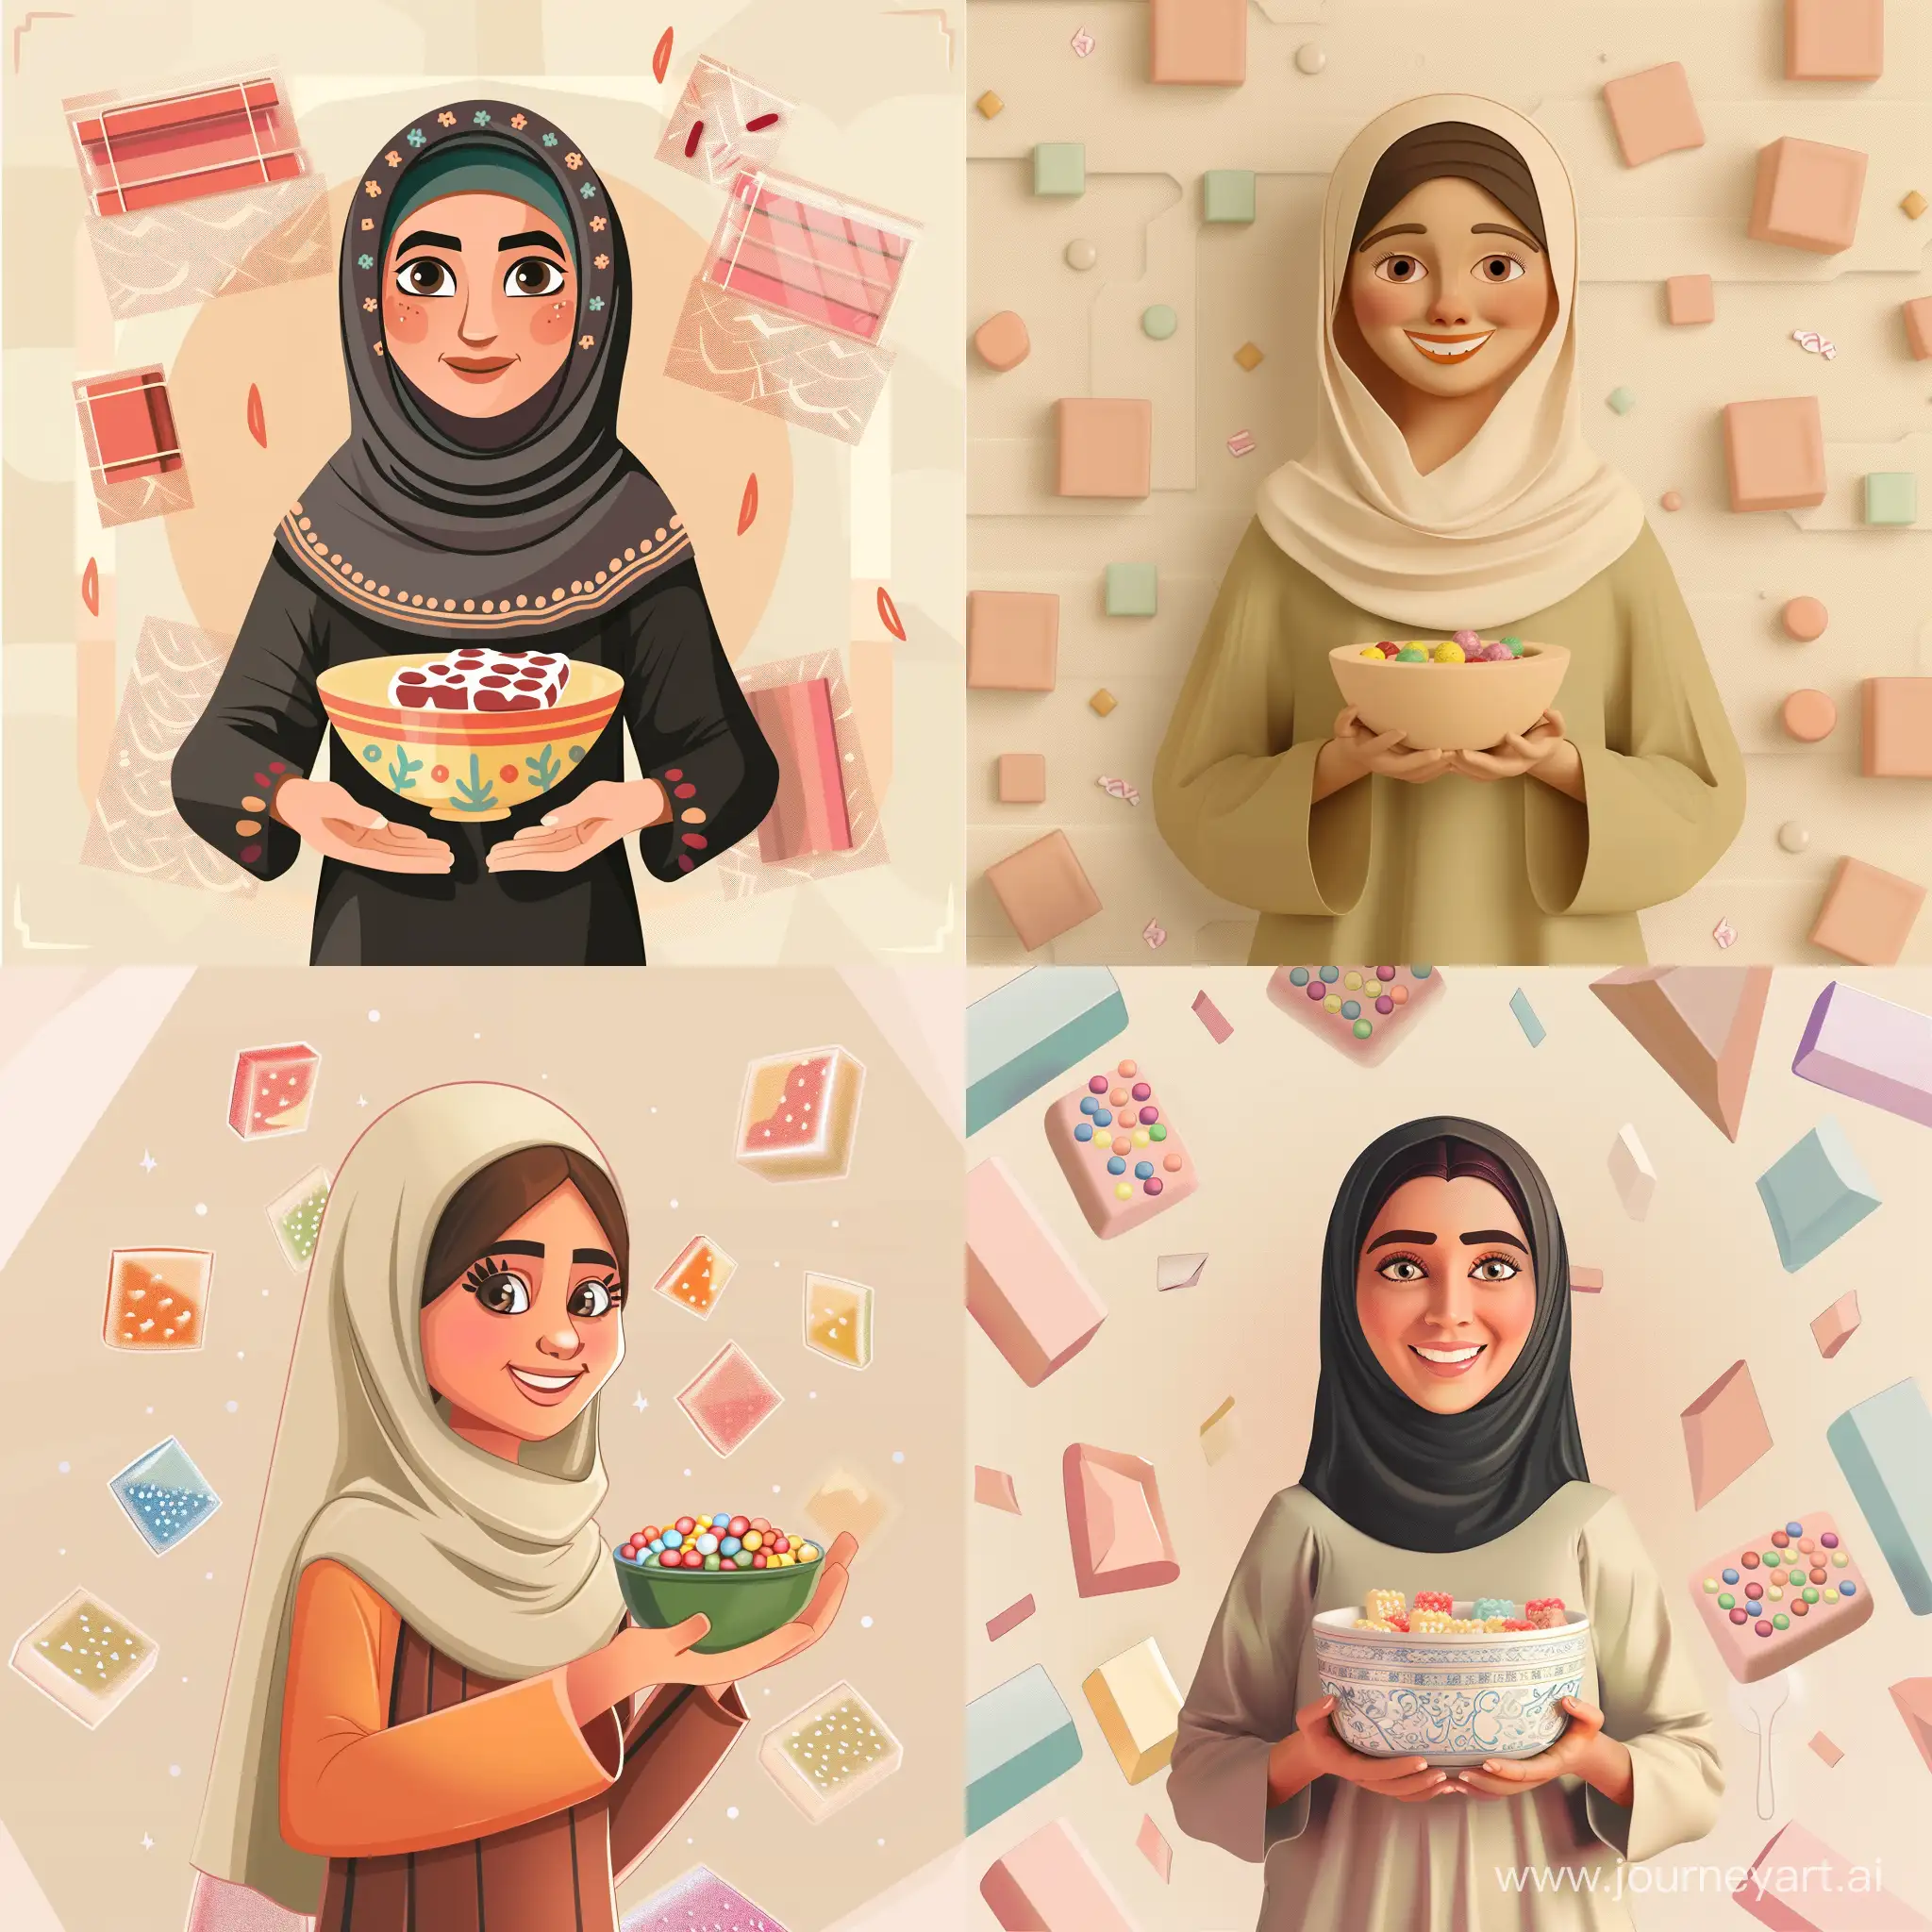 A cute Yemeni mother holds a toffee bowl and is very happy. The background is light beige, rectangular candy, and 3D pattern.